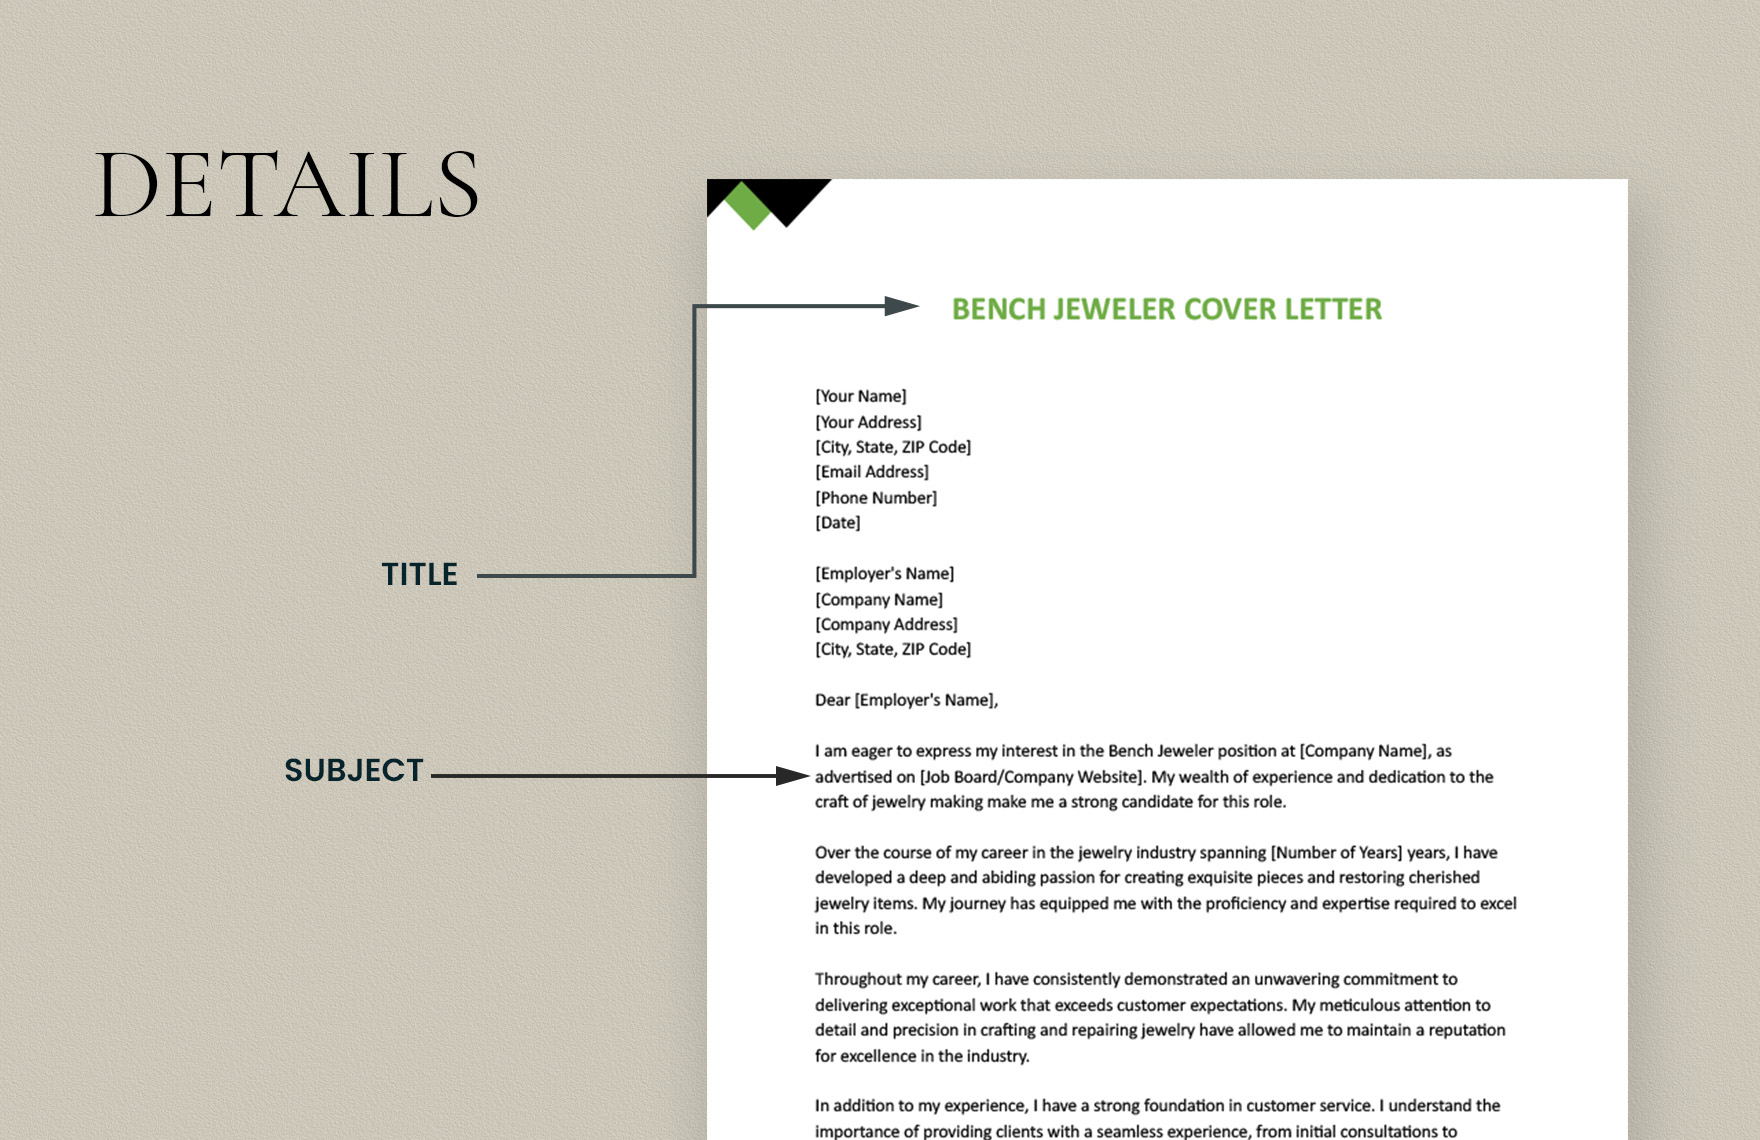 Bench Jeweler Cover Letter